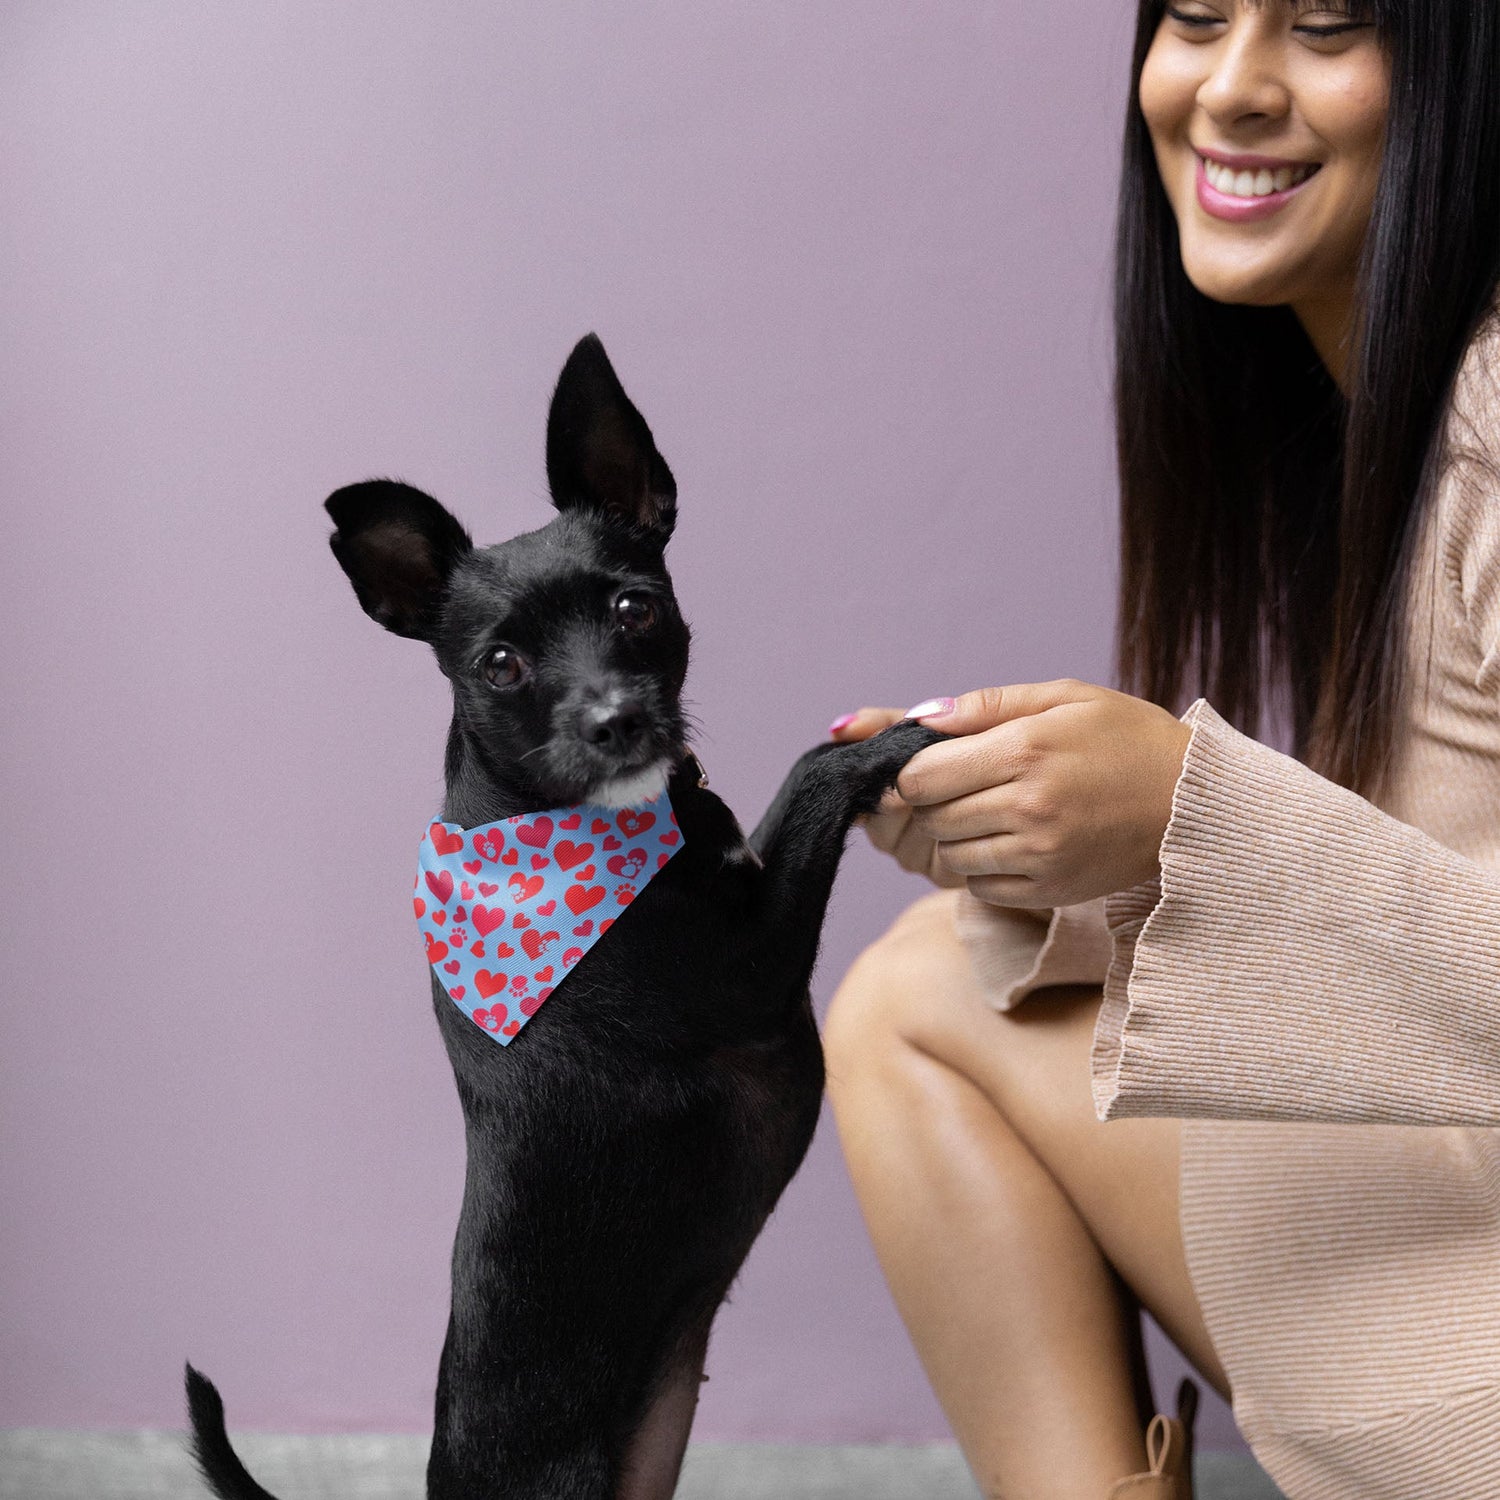  A young woman sits with a radiant smile, gently supporting her Chihuahua's front legs as it stands proudly upright beside her, wearing a Dogs Pure Love bandana